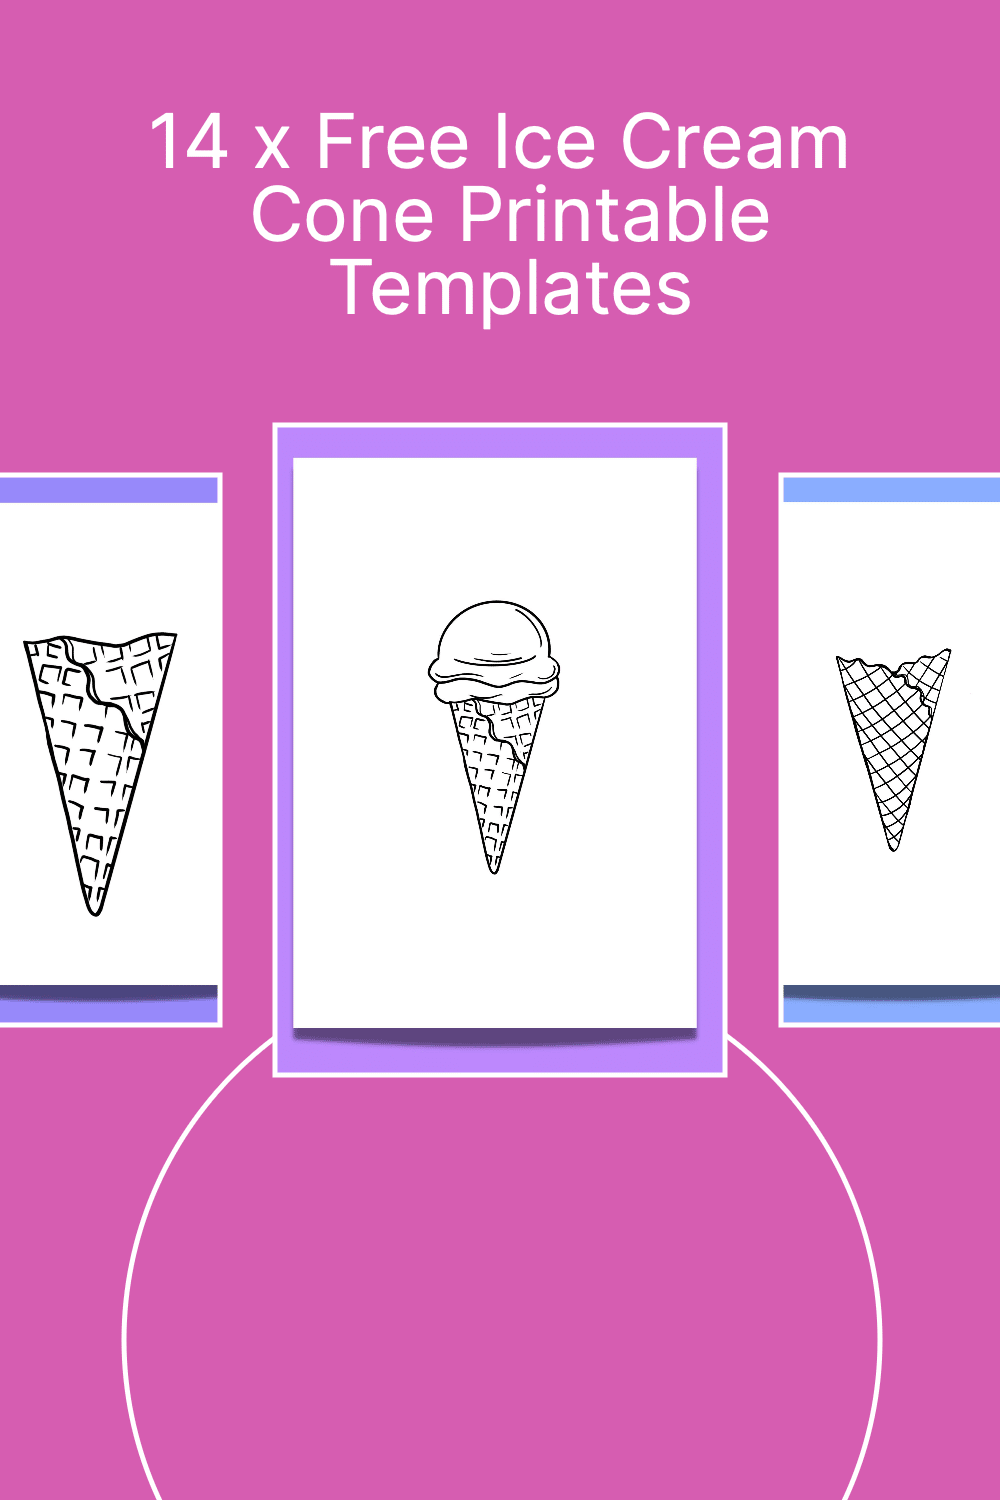 get-creative-with-these-14-free-ice-cream-cone-template-printables